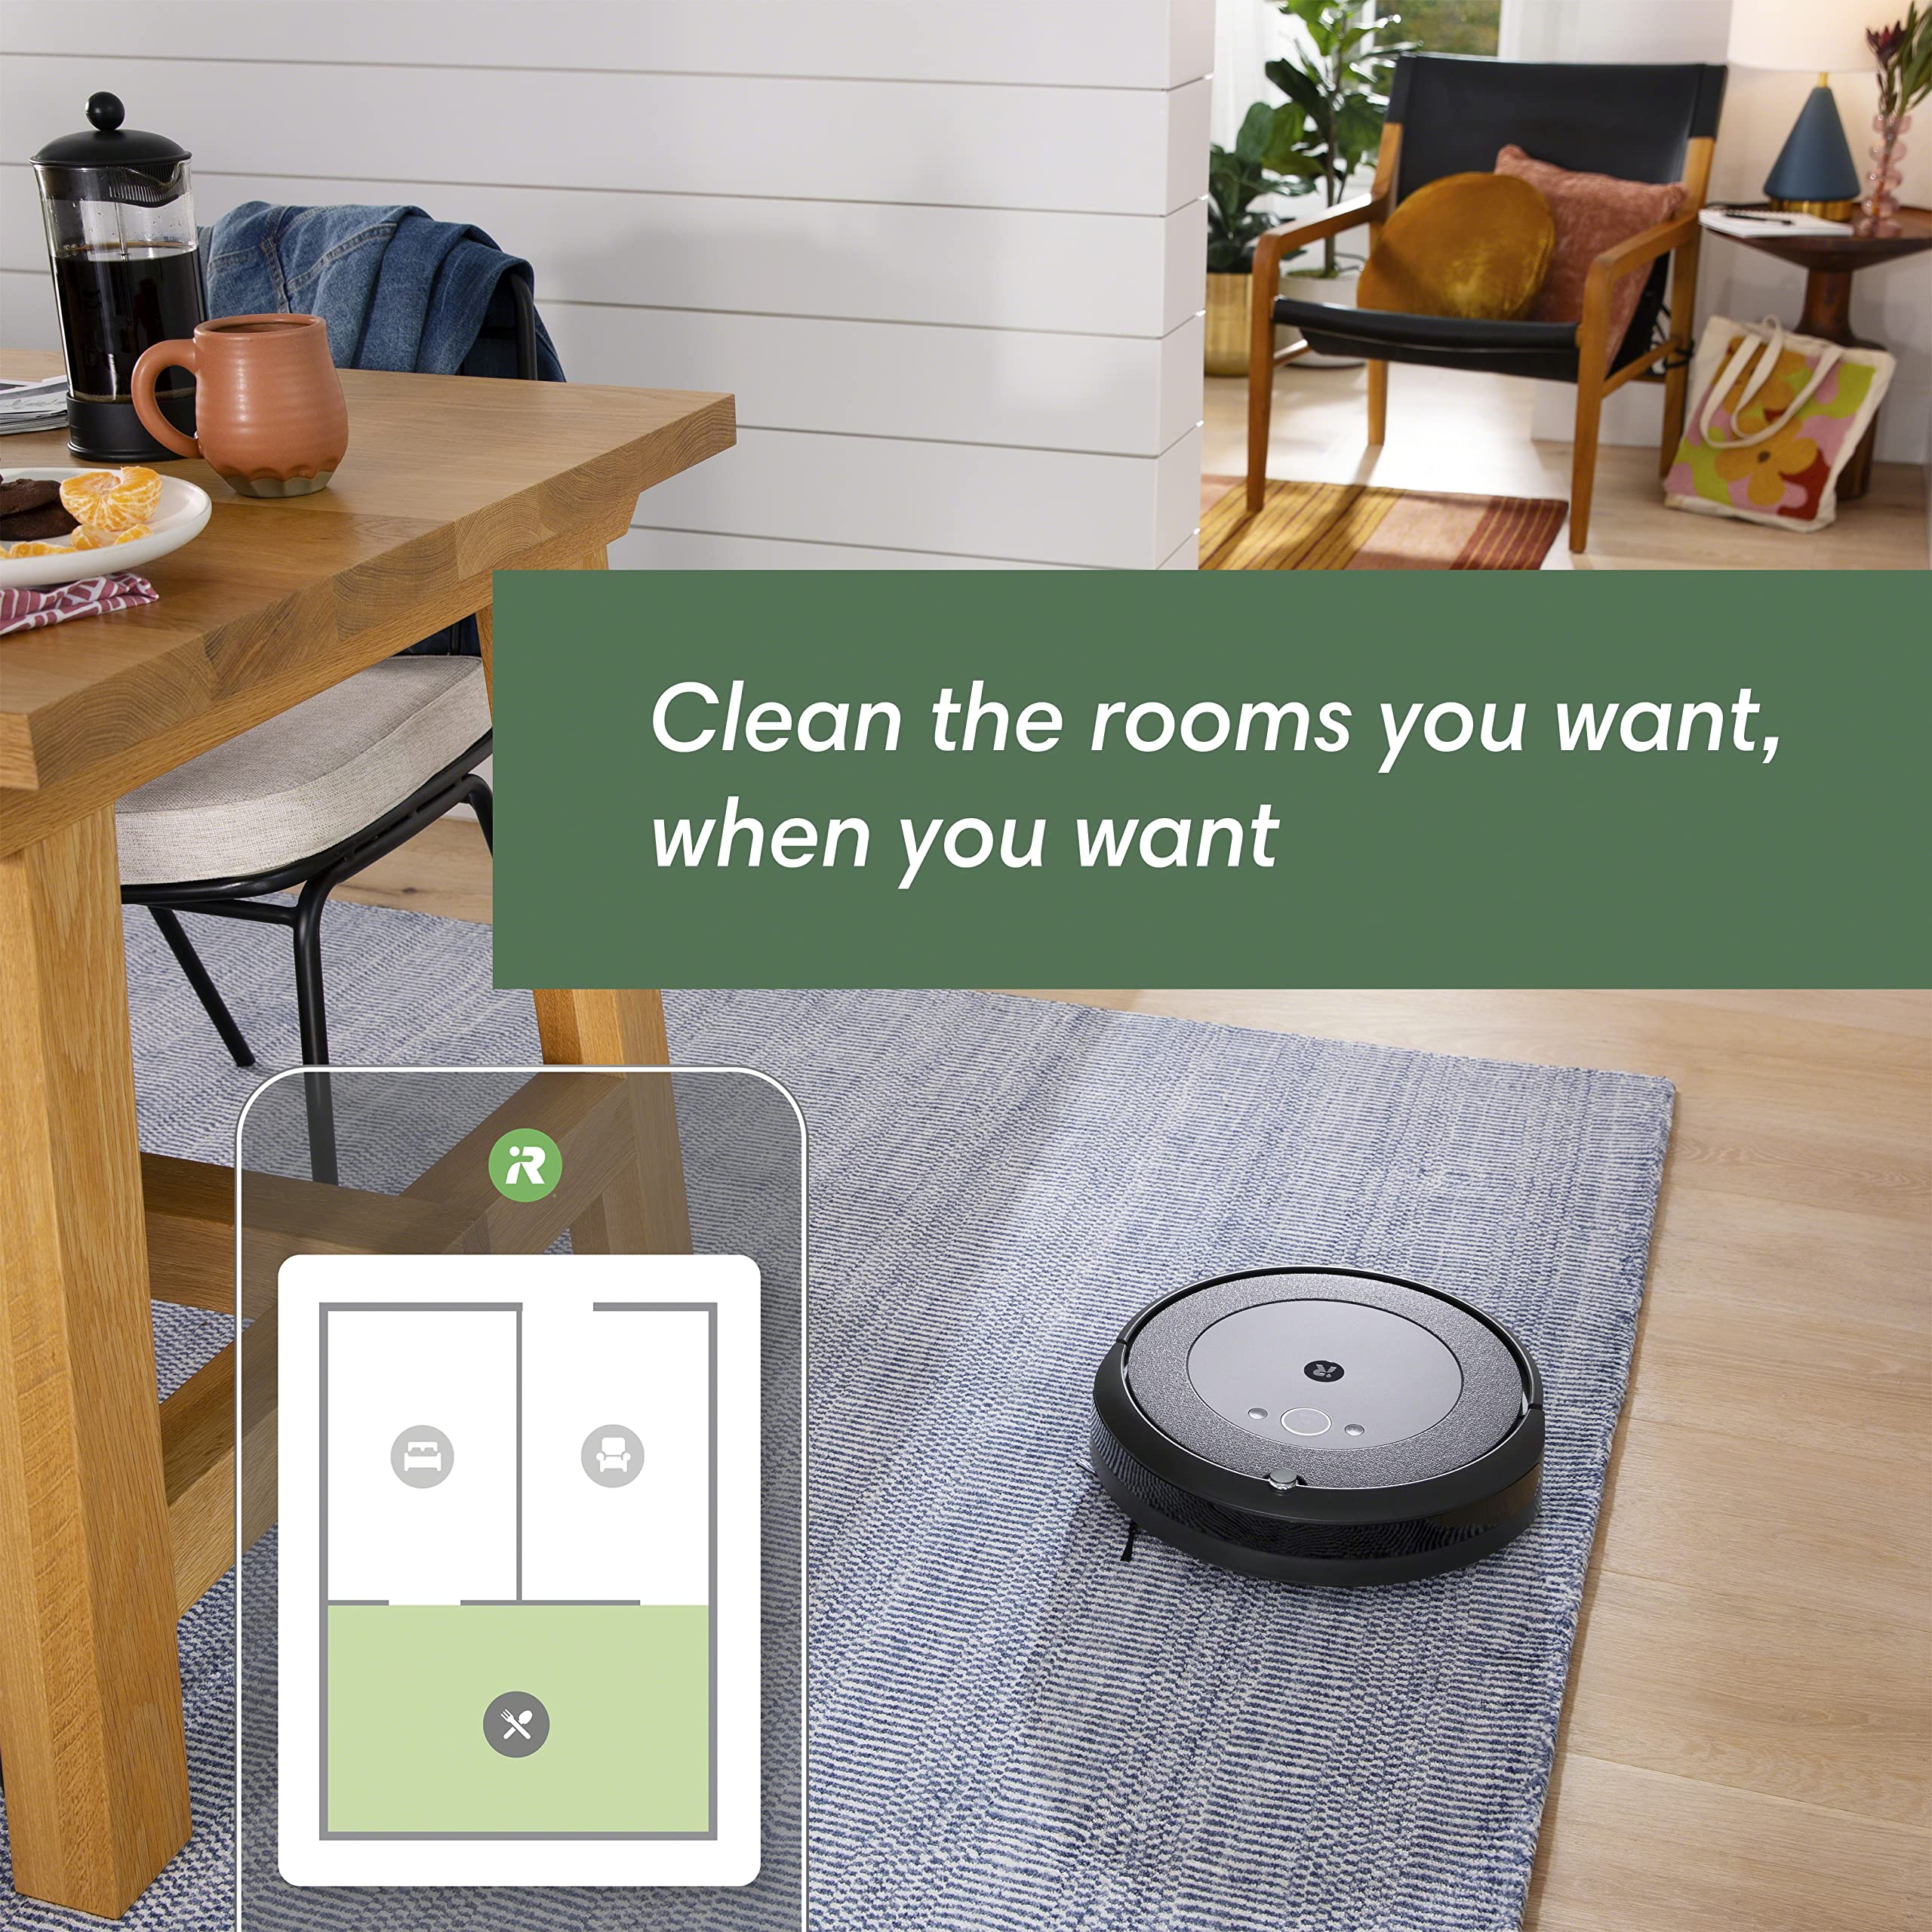 iRobot Roomba i3+ EVO (3550) Self-Emptying Robot Vacuum – Now Clean by Room with Smart Mapping, Empties Itself for Up to 60 Days, Works with Alexa, Ideal for Pet Hair, Carpets​, Roomba i3+